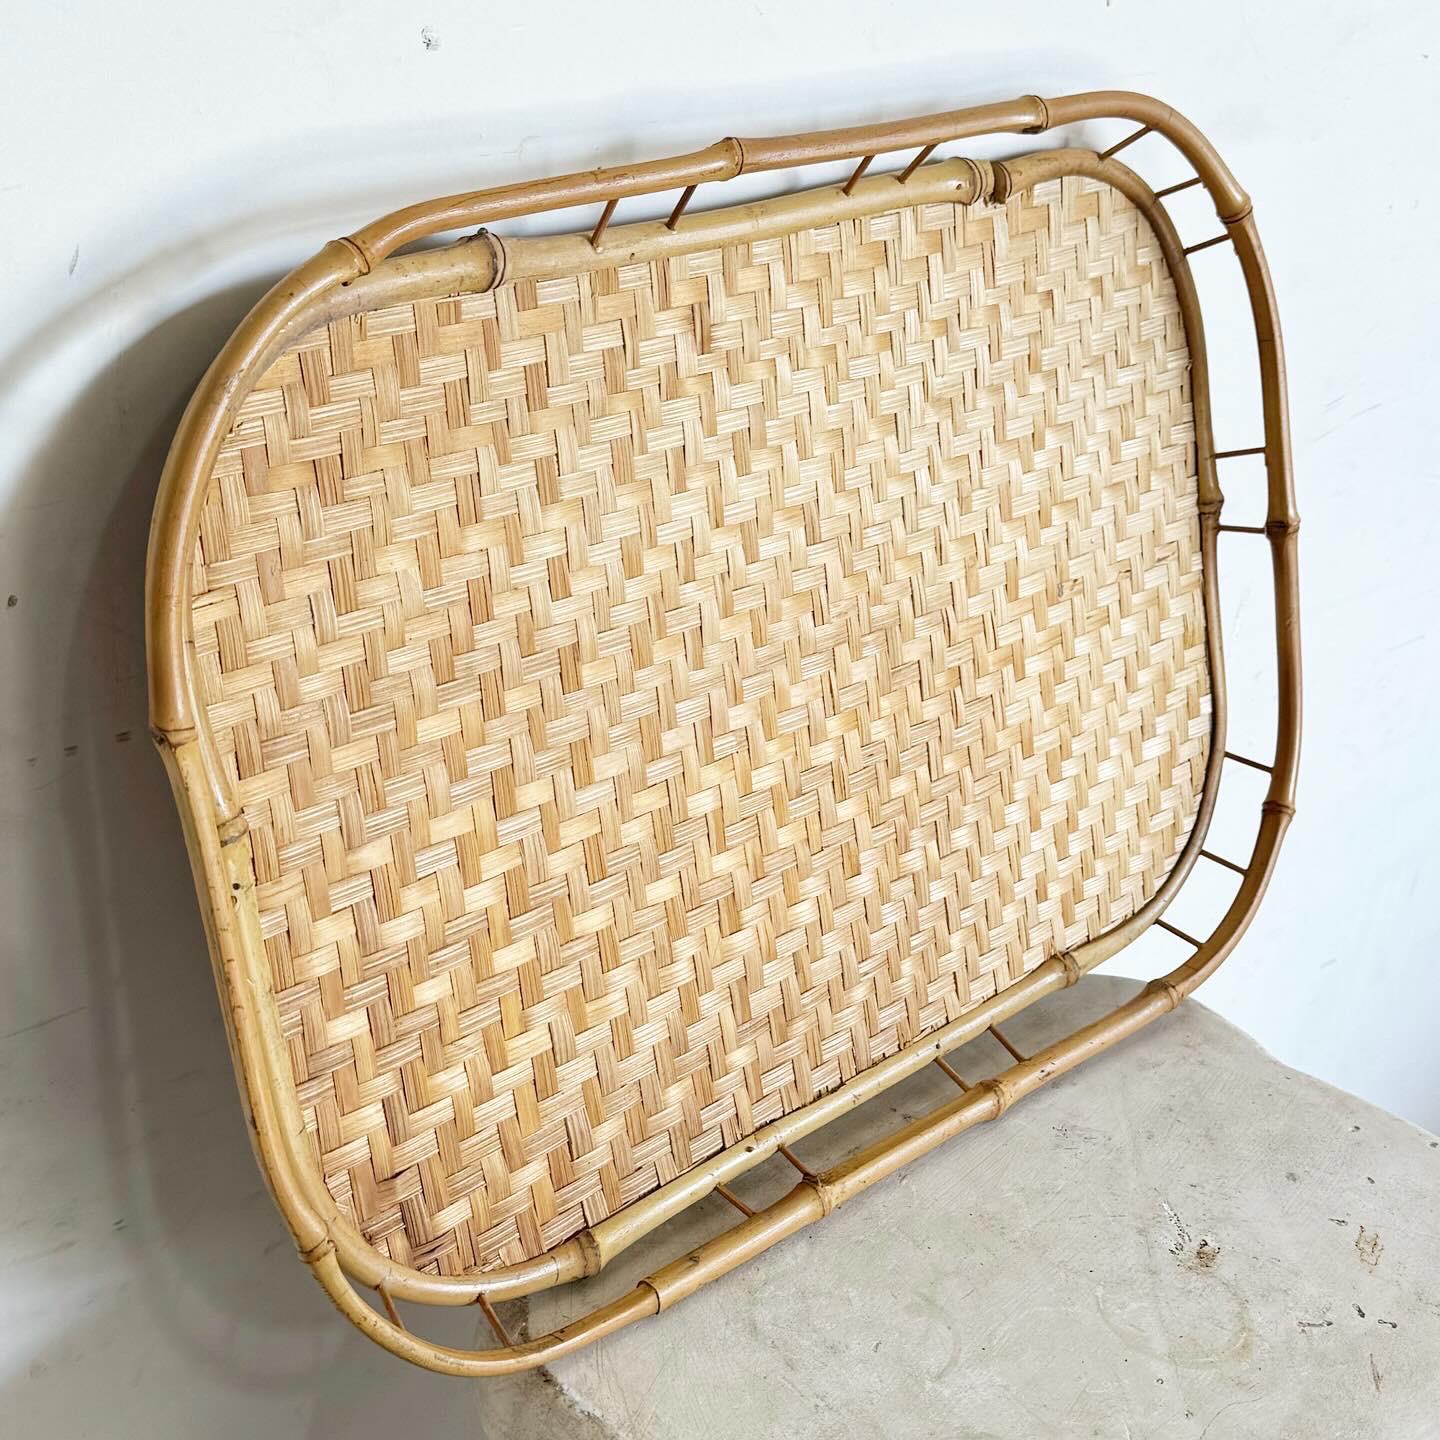 Discover the perfect blend of natural elegance and practical design with our Boho Chic Bamboo and Herringbone Tray. This beautifully crafted tray features a sturdy bamboo frame, providing a sustainable and durable base. The interior is adorned with